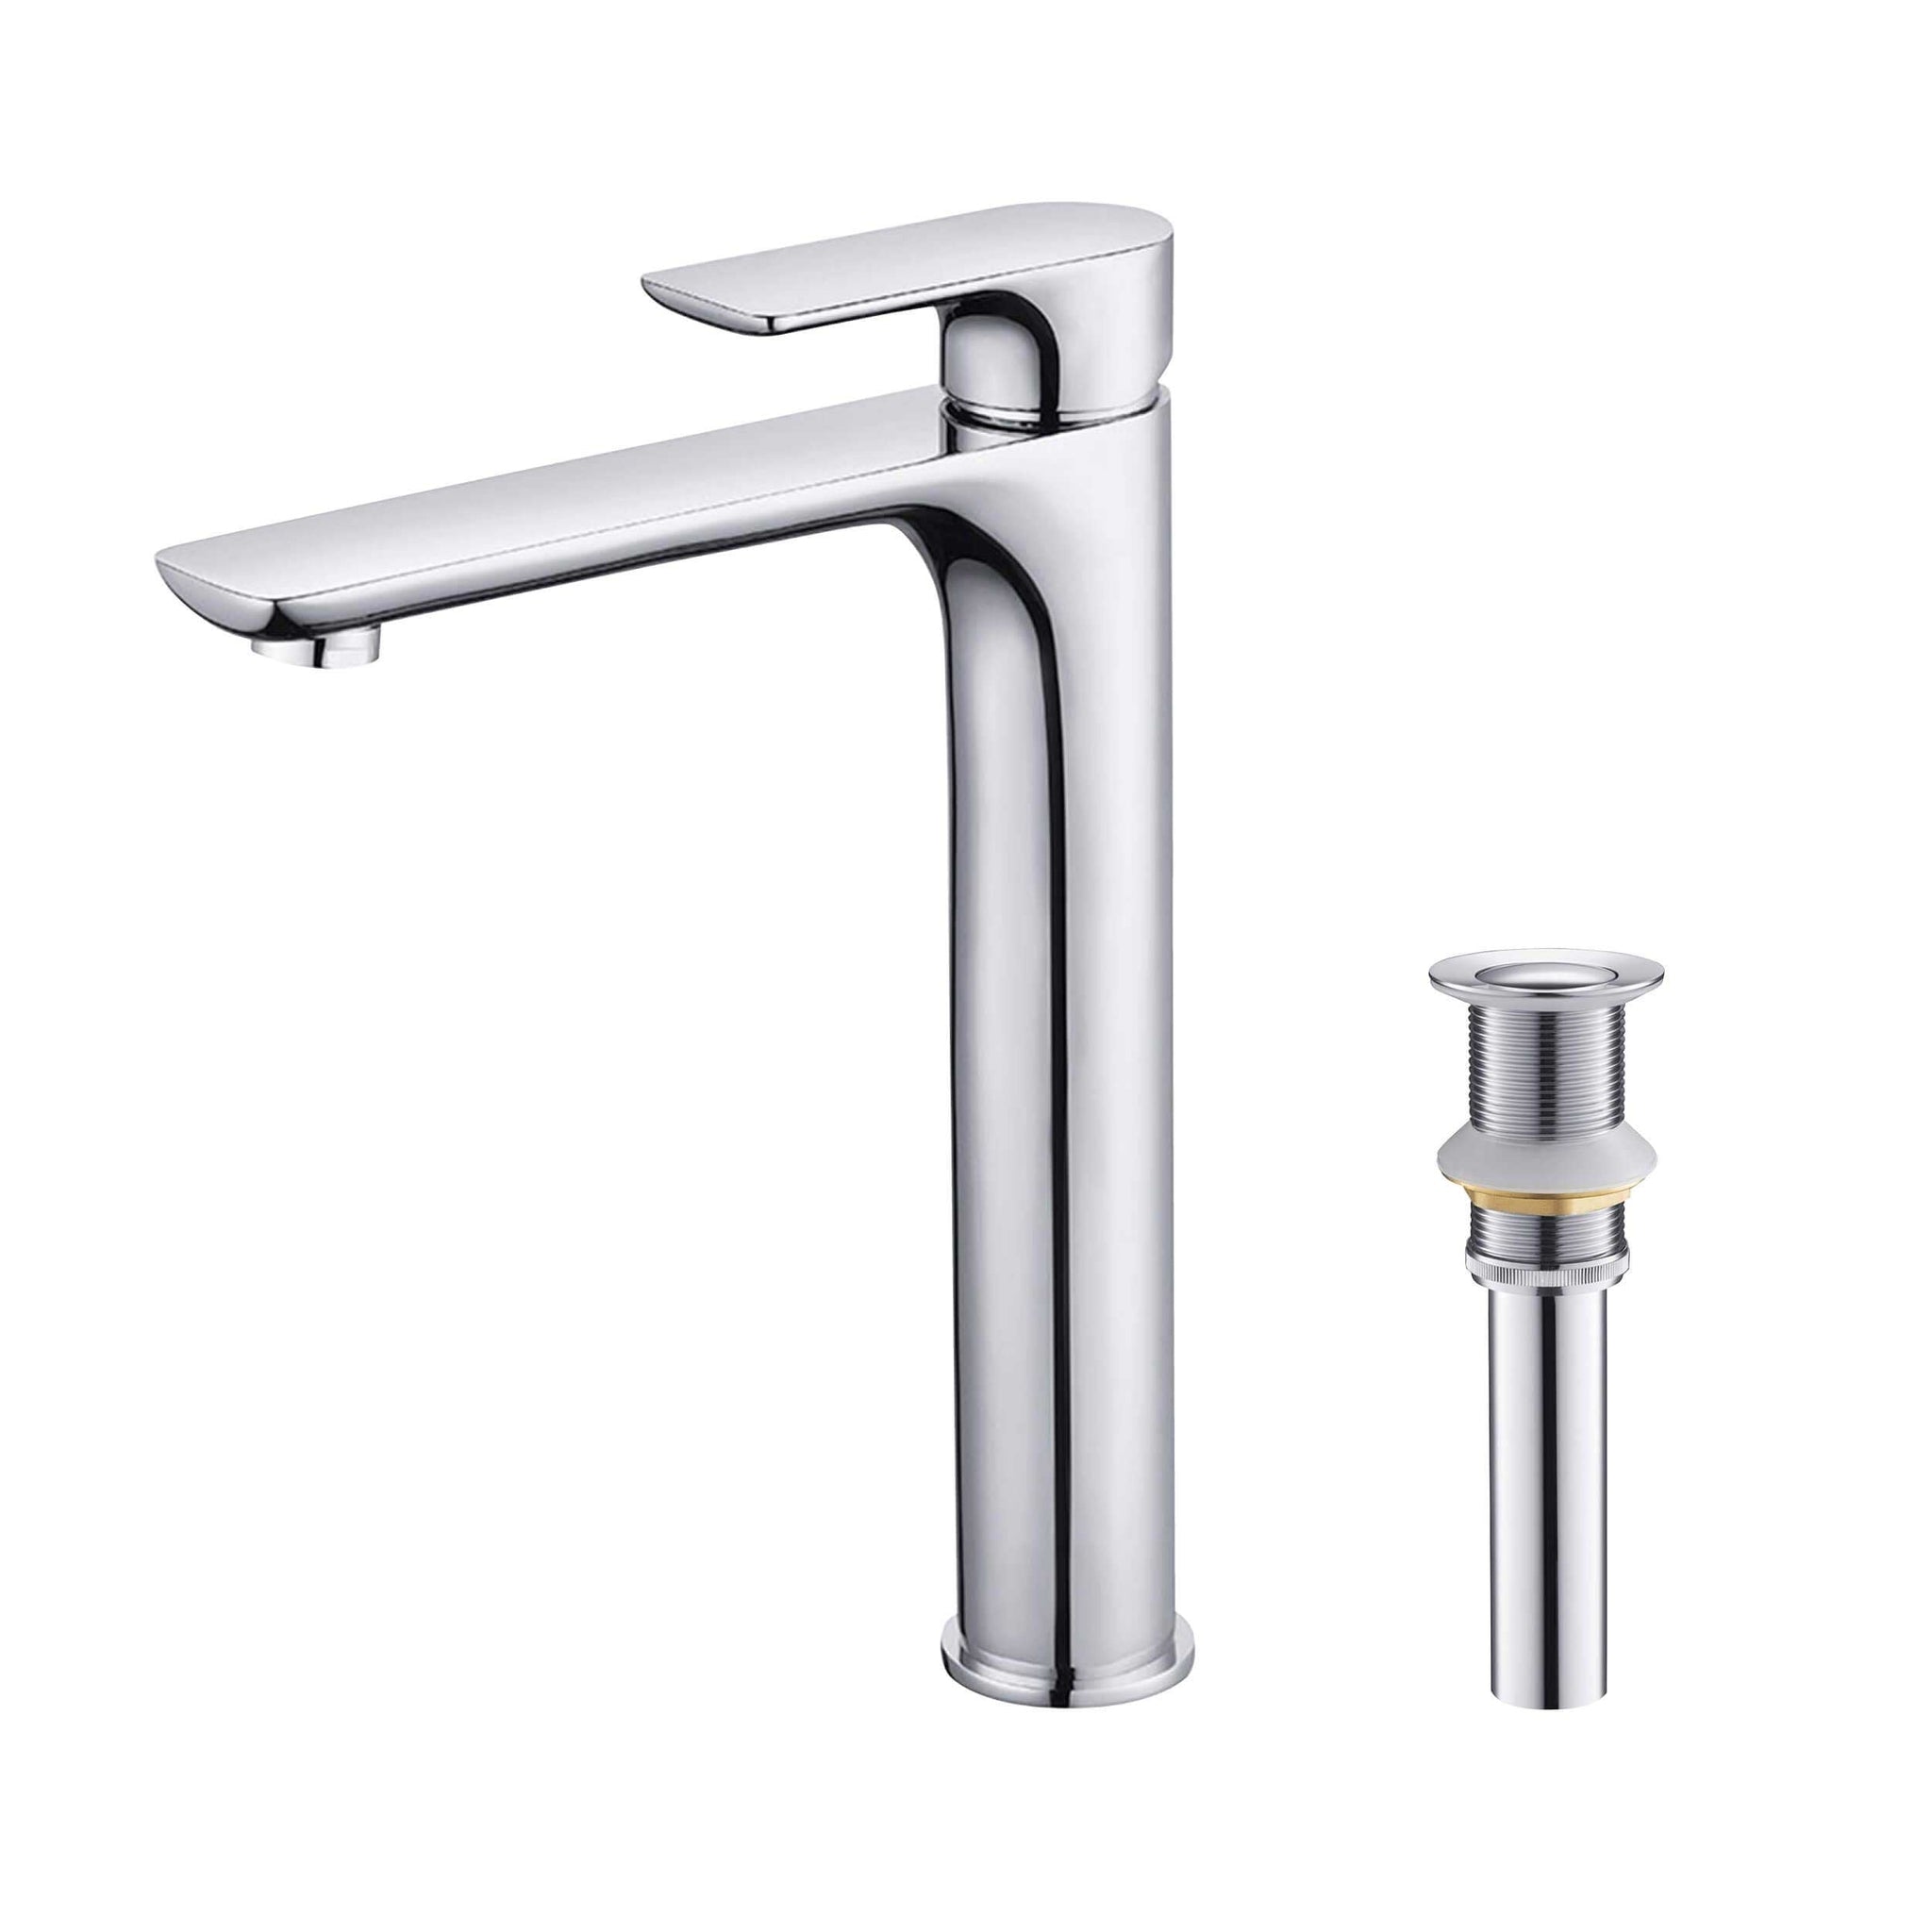 KIBI, KIBI Tender-T Single Handle Chrome Solid Brass Bathroom Vessel Sink Faucet With Pop-Up Drain Stopper Small Cover Without Overflow